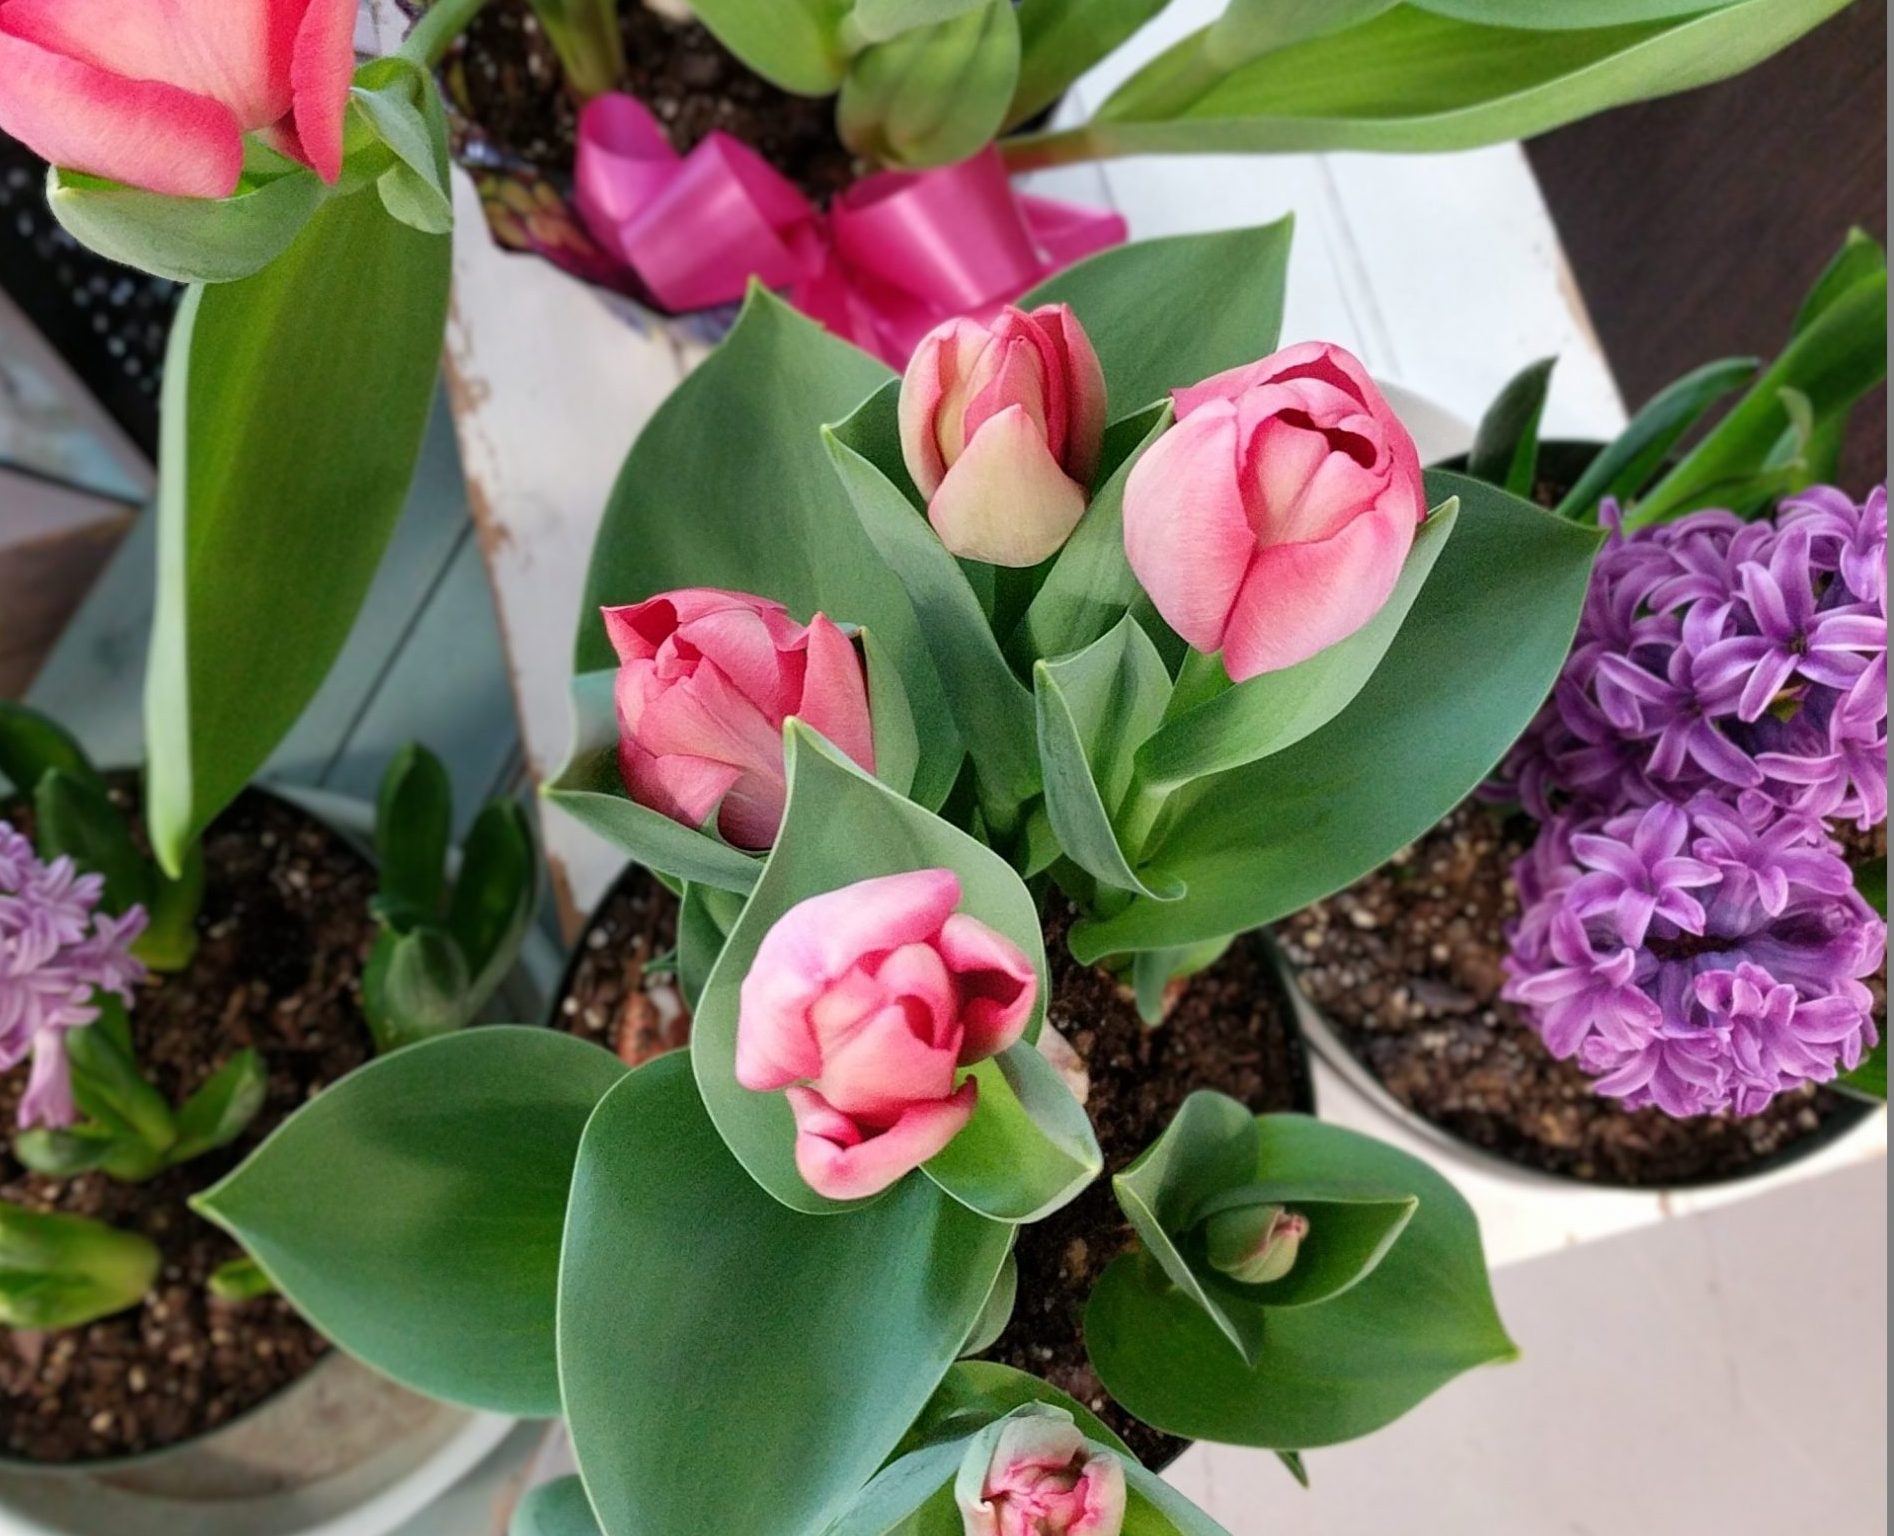 pink tulips from a top angle and purple hyacinth in the early spring